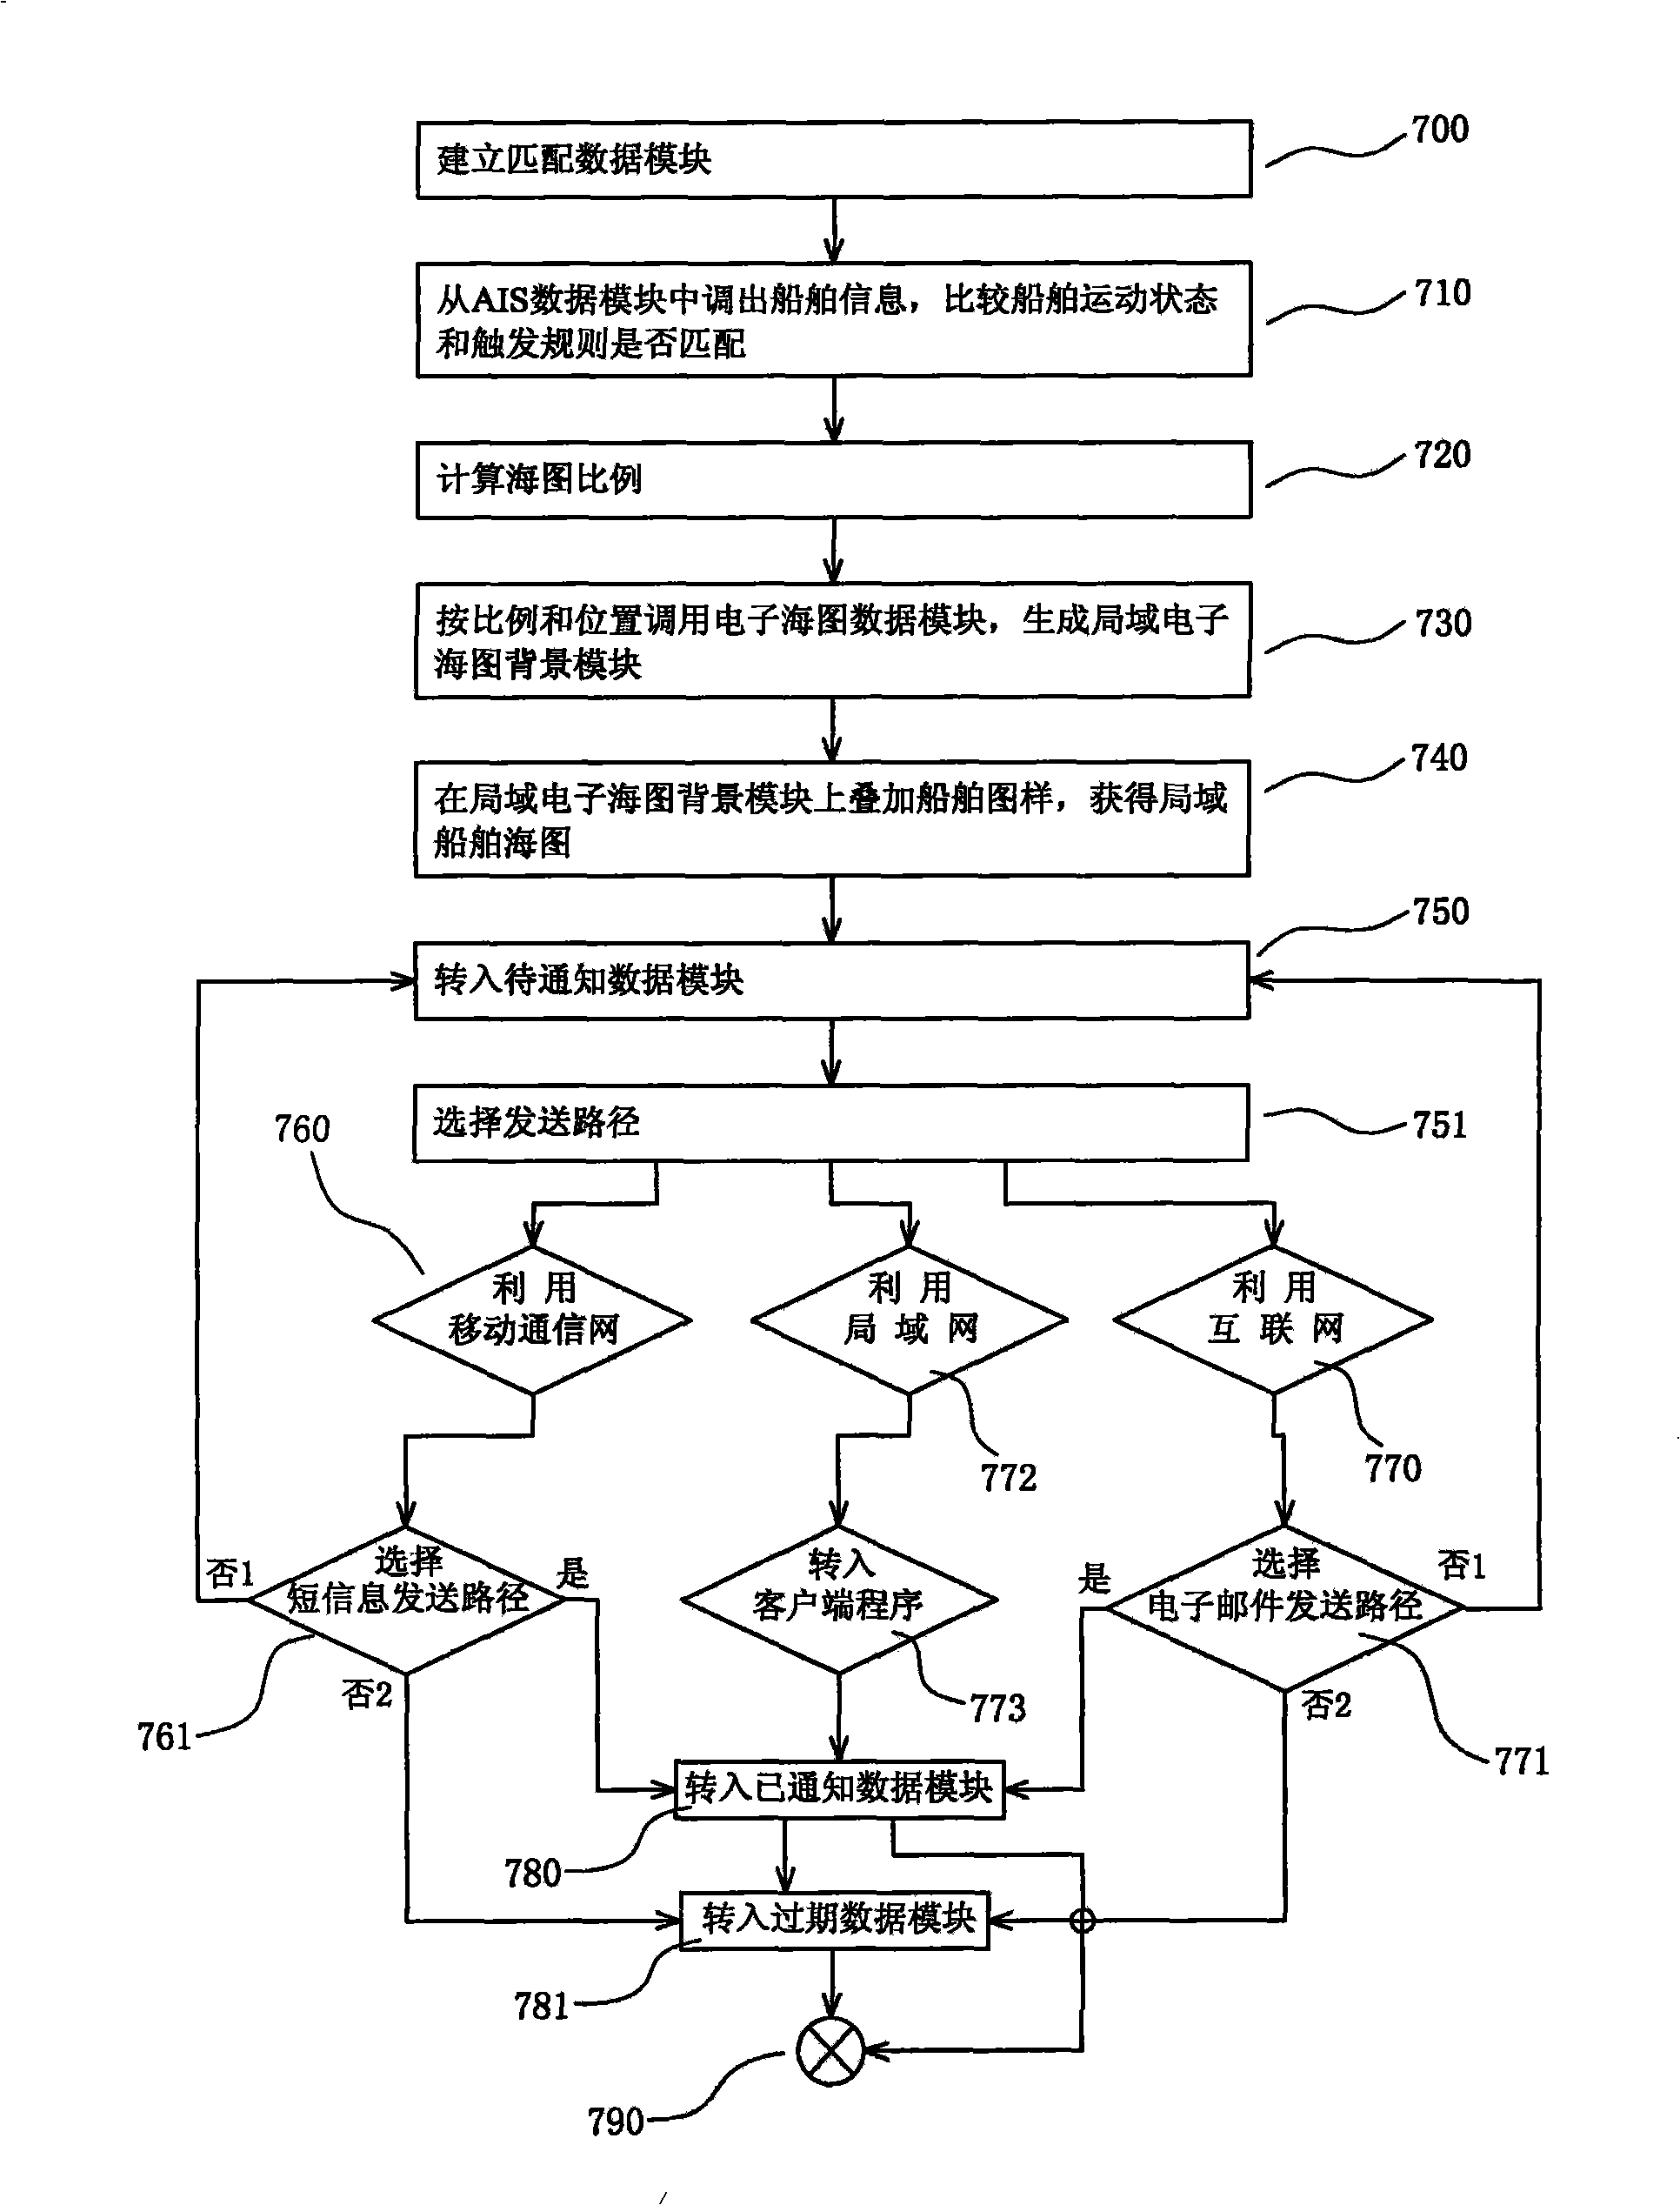 Vessel movement monitoring and informing system and implementing method thereof